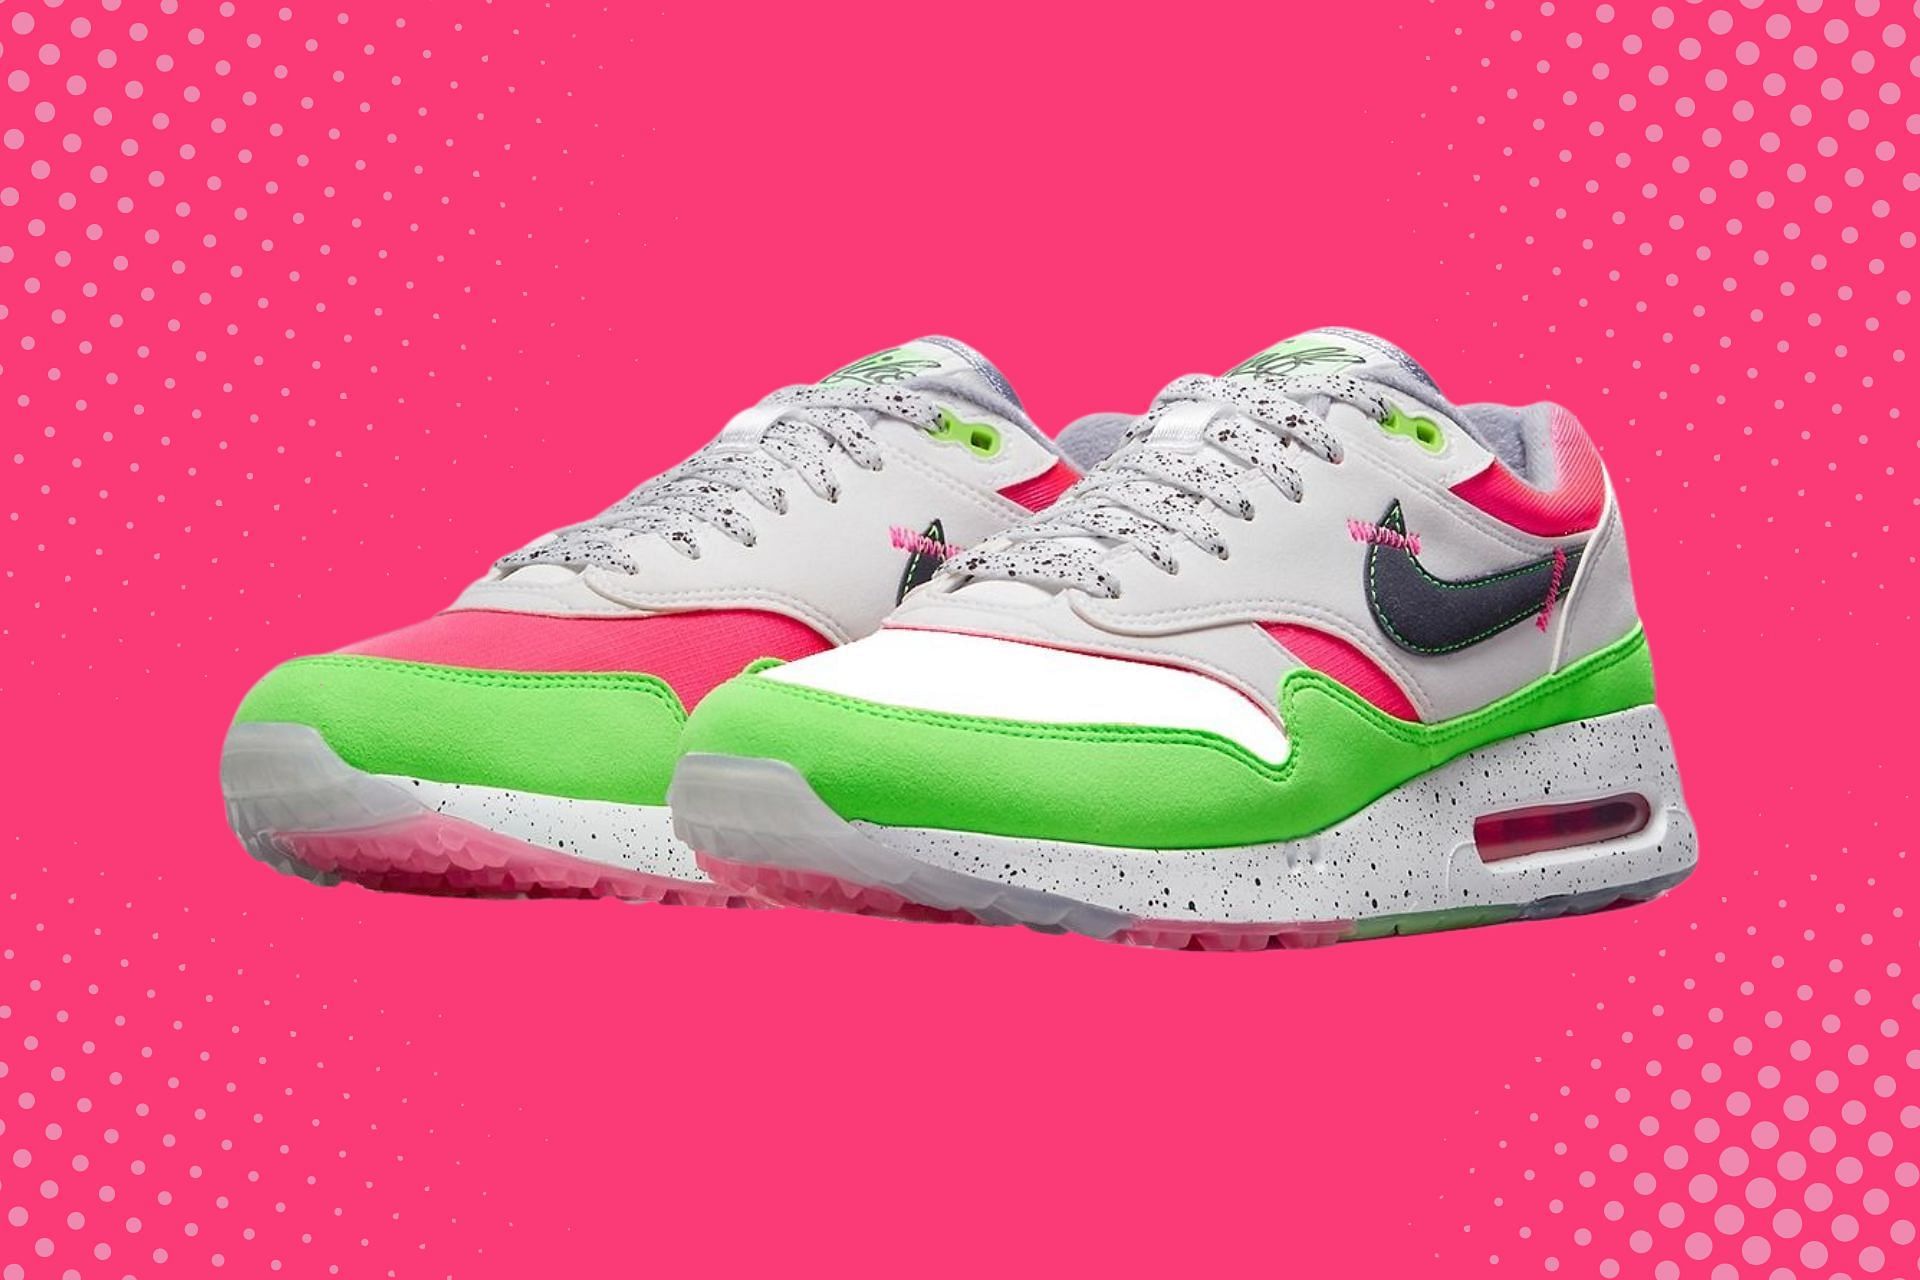 Compositor objetivo Célula somatica Watermelon: Nike Air Max 1 '86 OG Golf “Watermelon” shoes: Where to buy,  price, and more details explored